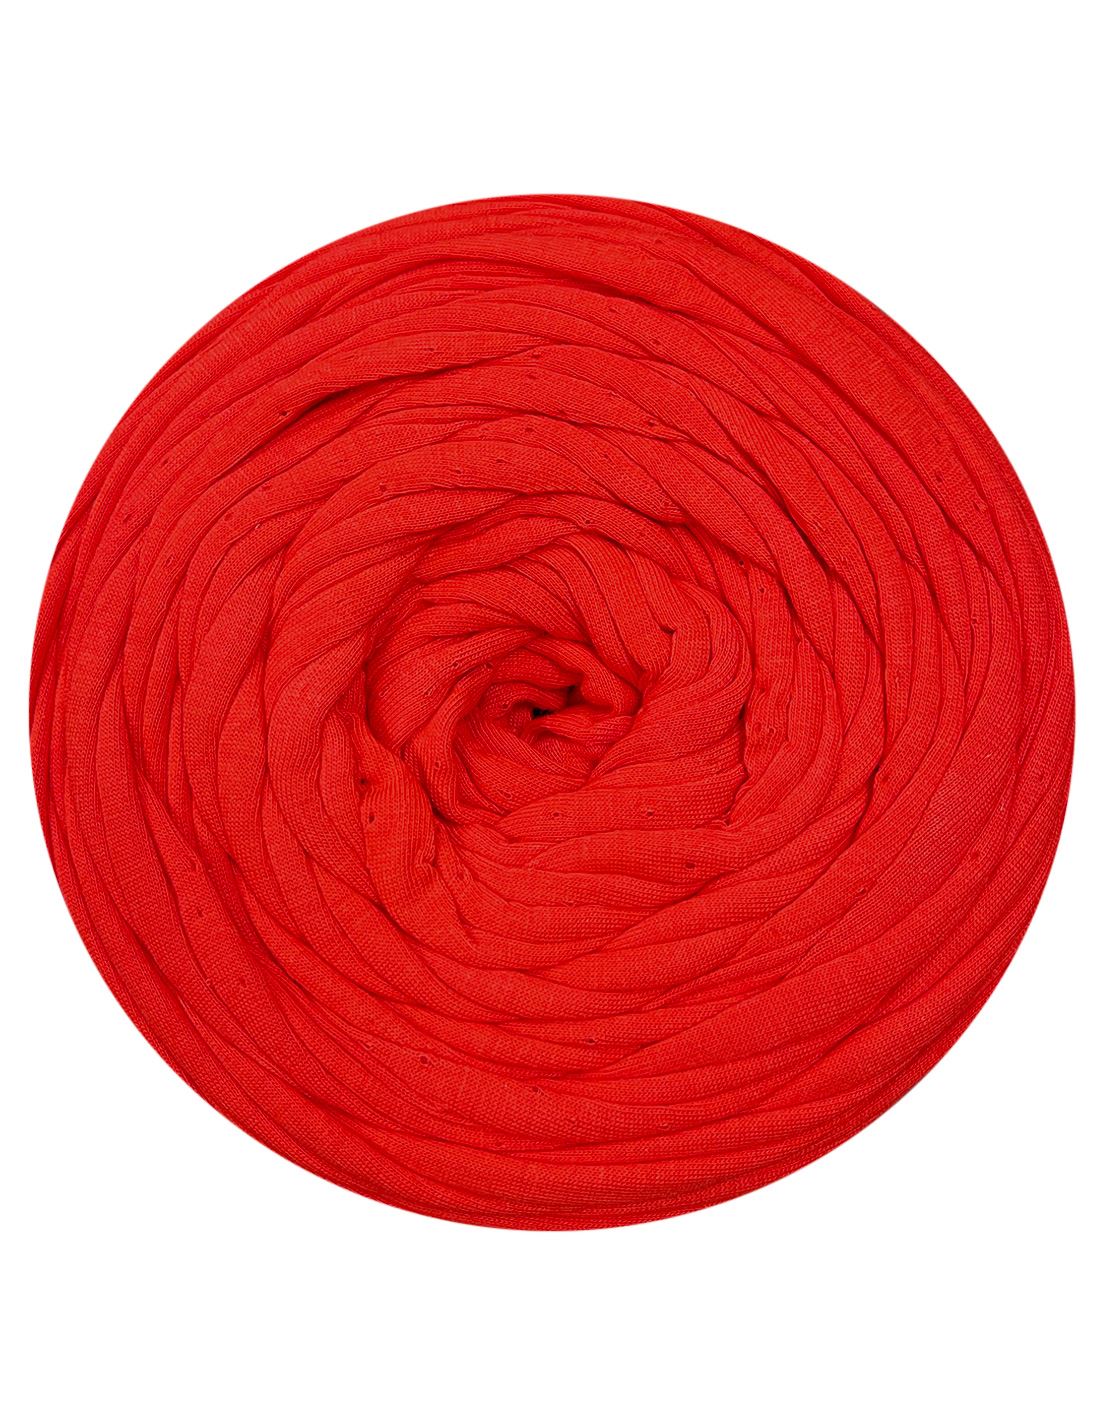 Light scarlet red t-shirt yarn by Hoooked Zpagetti (100-120m)